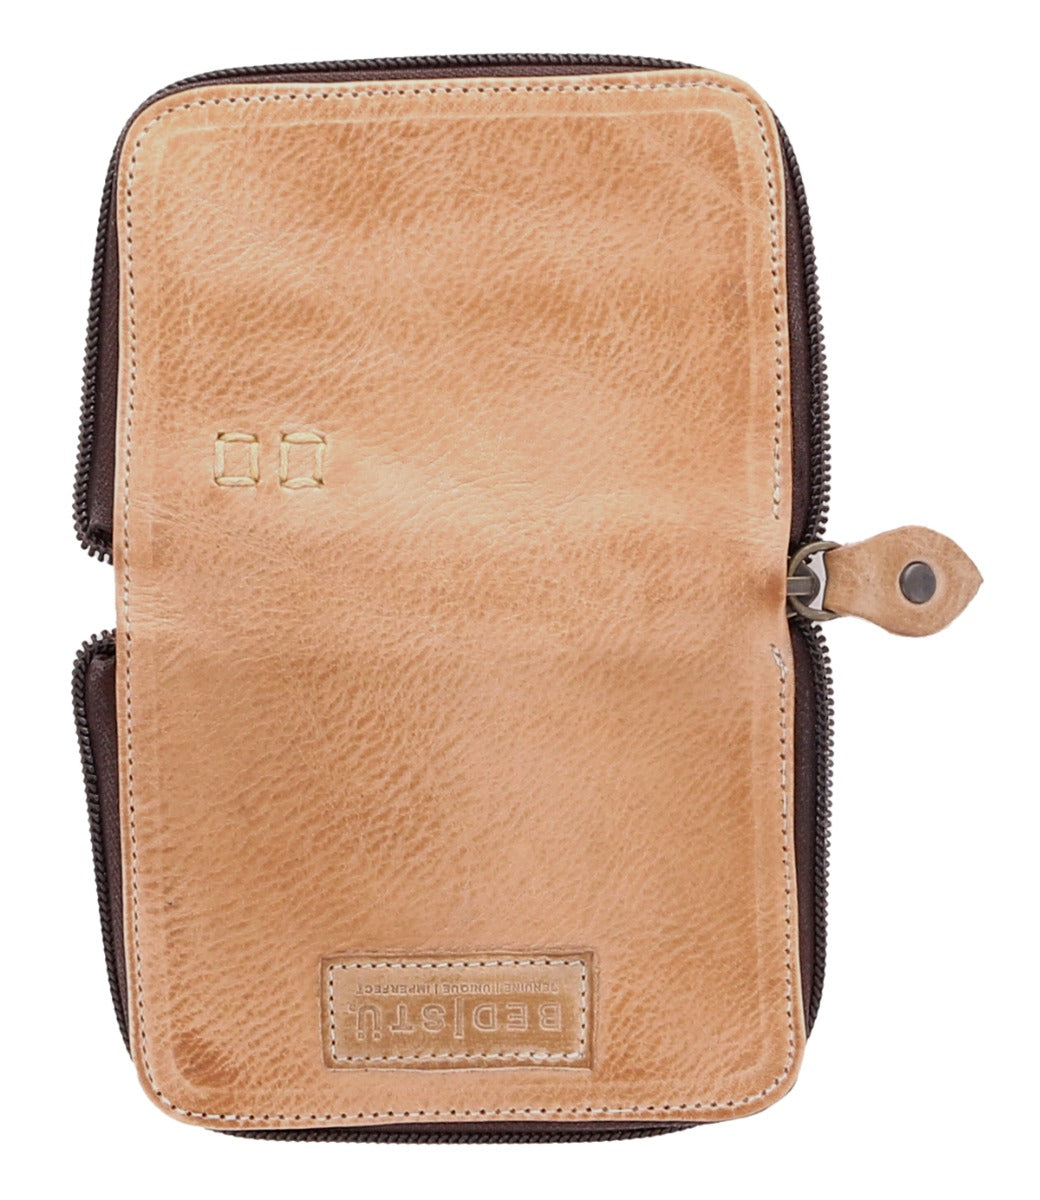 A Bed Stu Ozzie tan leather wallet with two zippers.